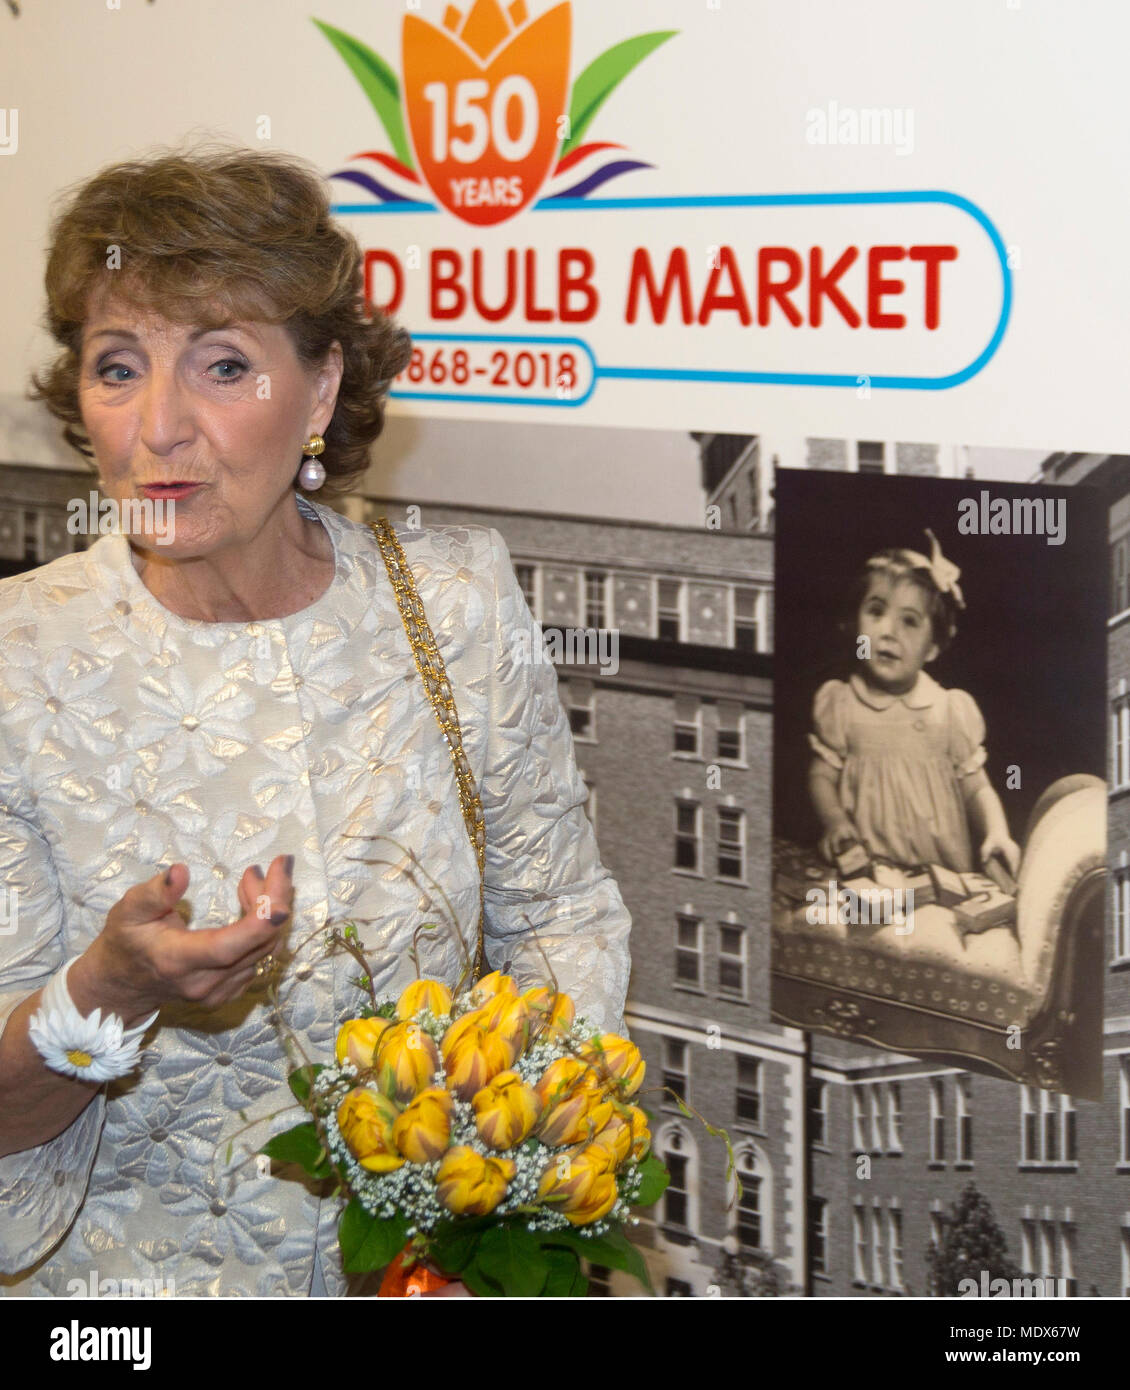 Heiloo, Netherlands. 20th Apr, 2018. Princess Margriet of The Netherlands at Holland Bulb Market in Heiloo, on April 20, 2018, to attend the celebration of the 150-year jubilee, the flower bulb company focuses on the development of new varieties (tulip, iris and amaryllis) Credit: Albert Ph vd Werf/Netherlands OUT/Point De Vue Out Credit: Albert van den Werf/RoyalPress/dpa/Alamy Live News Stock Photo